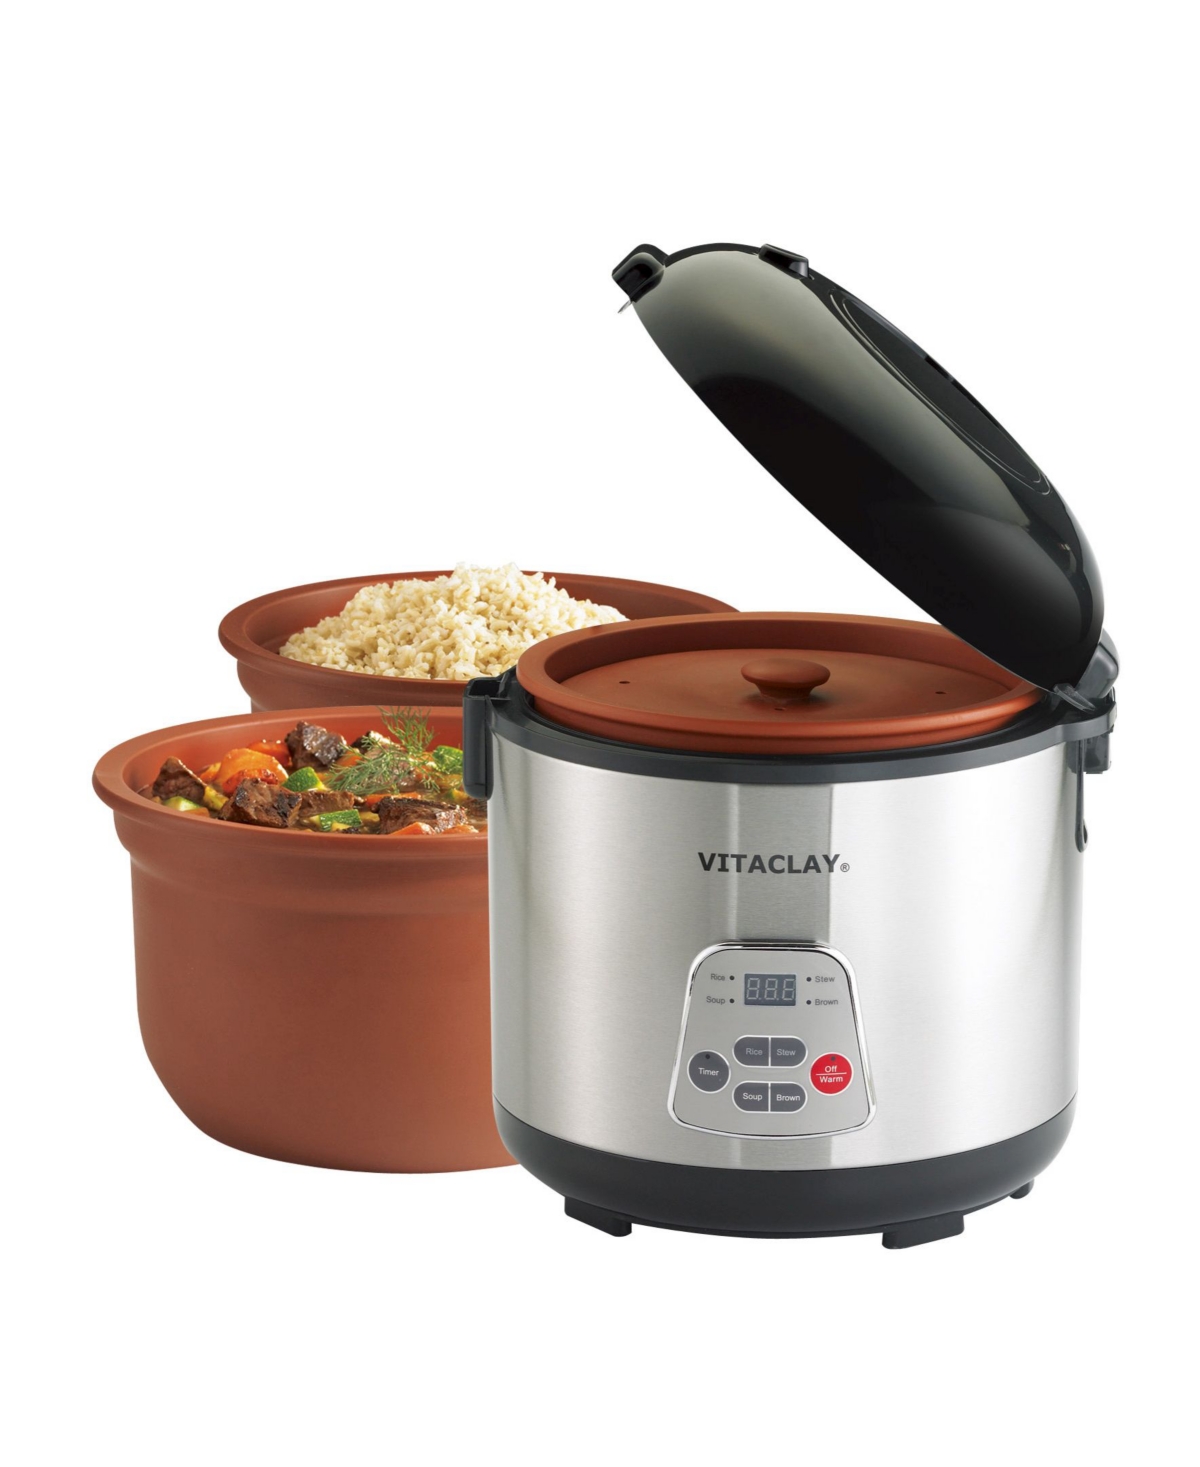 2 in 1 Clay Rice and Slow Cooker, 4.2 Qt - Silver